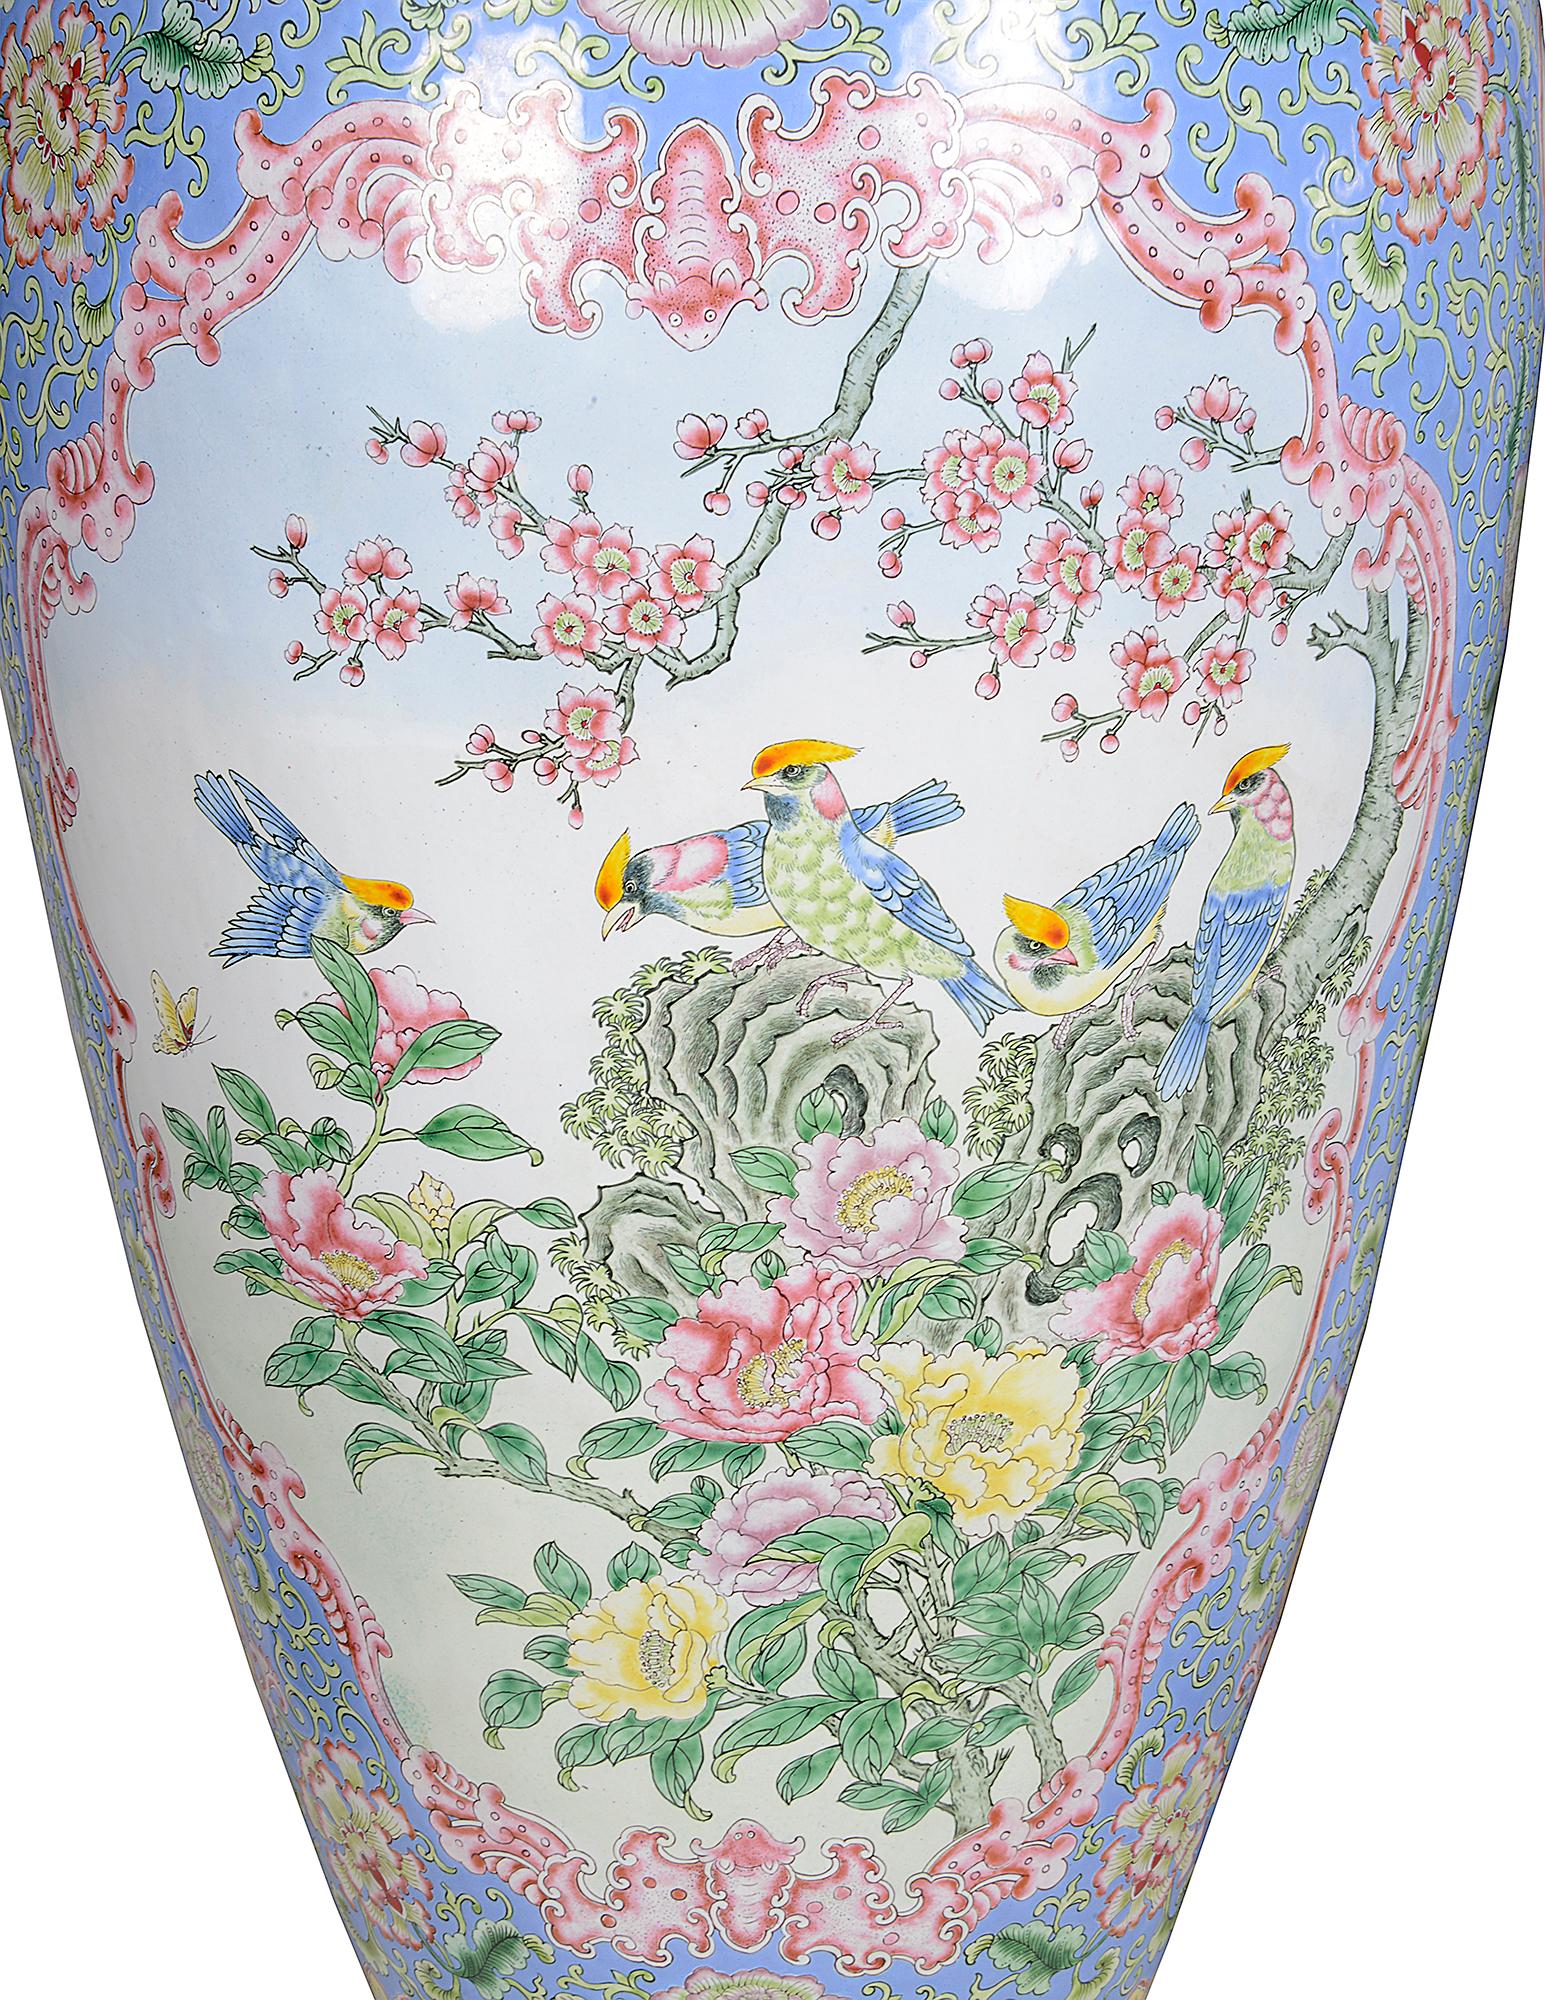 A very impressive pair of late 19th century Chinese Canton enamel vases, each with wonderful pastel colours, with a powder blue ground exotic floral decoration, inset panels depicting birds in the blossom trees.